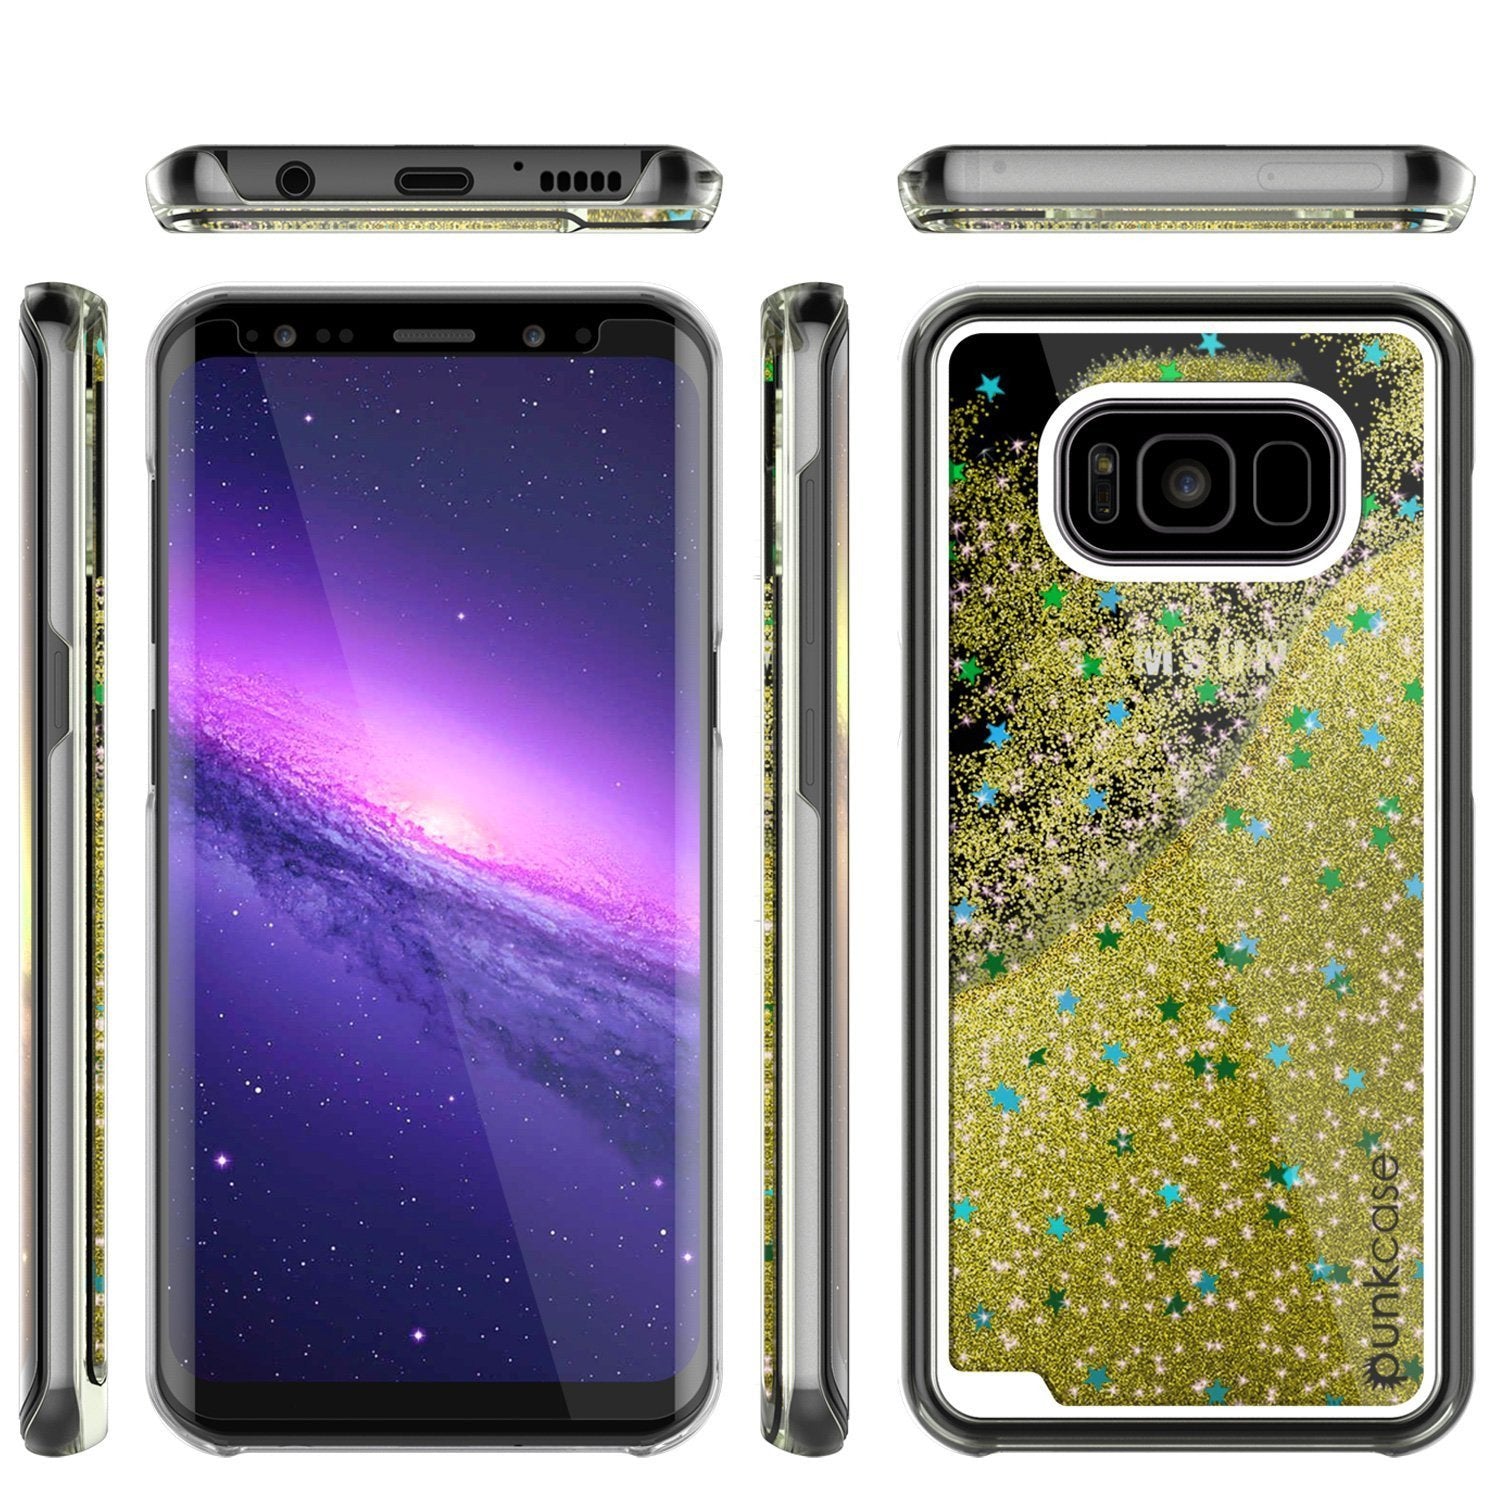 Galaxy S8 Case, Punkcase [Liquid Series] Protective Dual Layer Floating Glitter Cover [Gold]